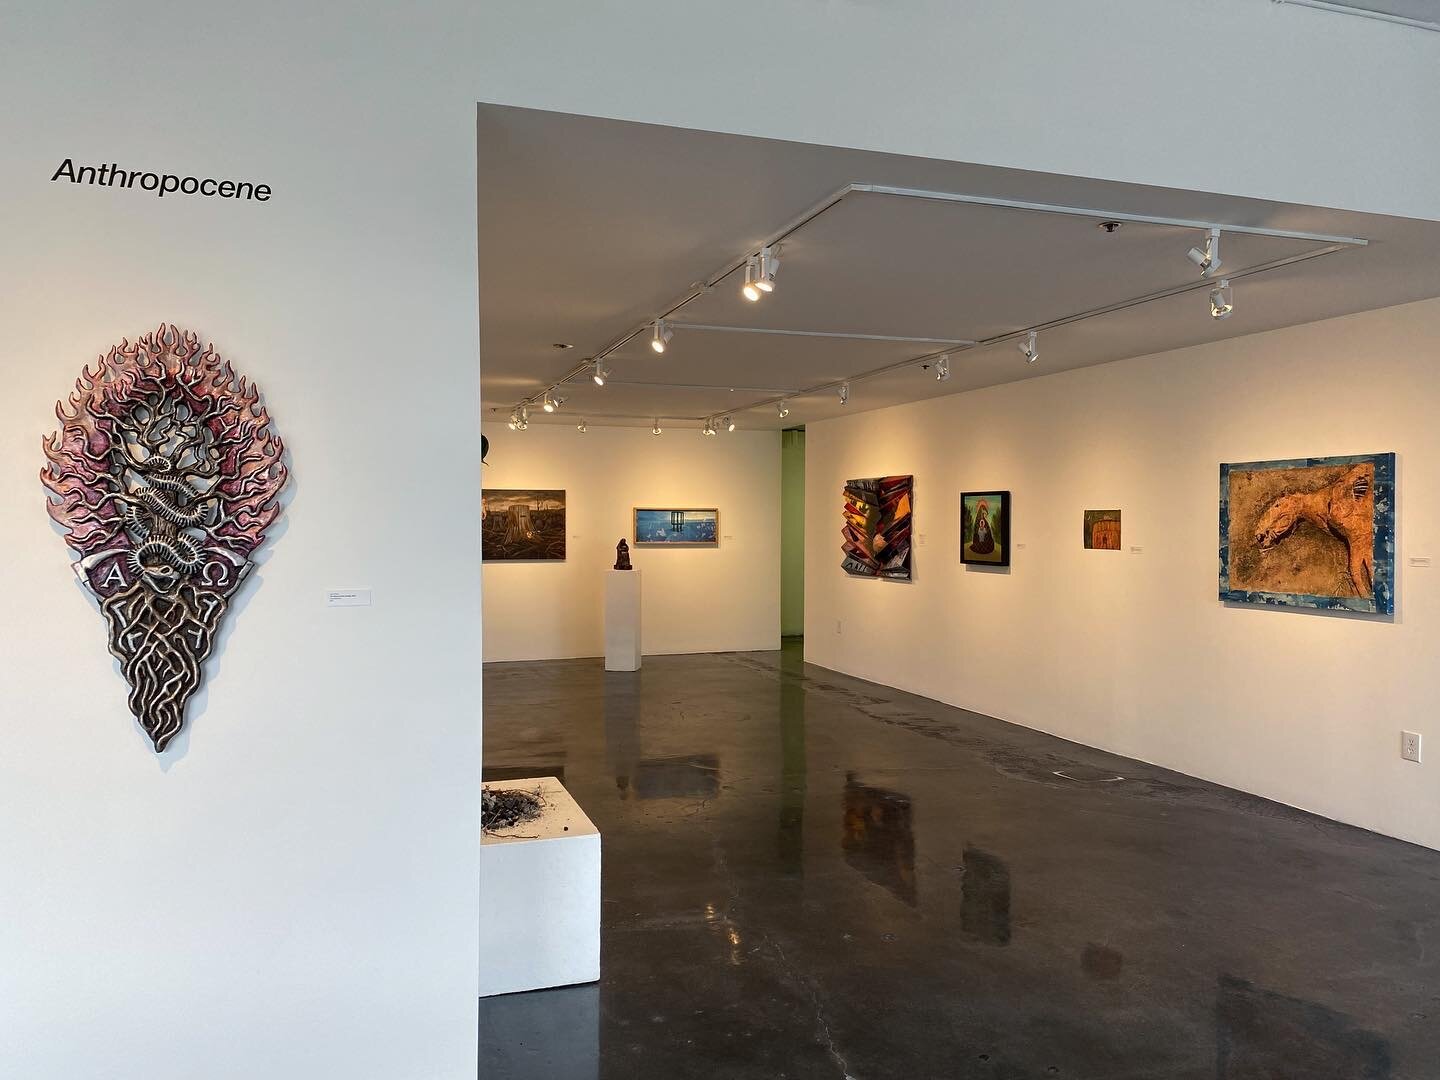  August 2020 - Center and South Gallery -  Anthropocene  group show curated by John Coyne center gallery view 